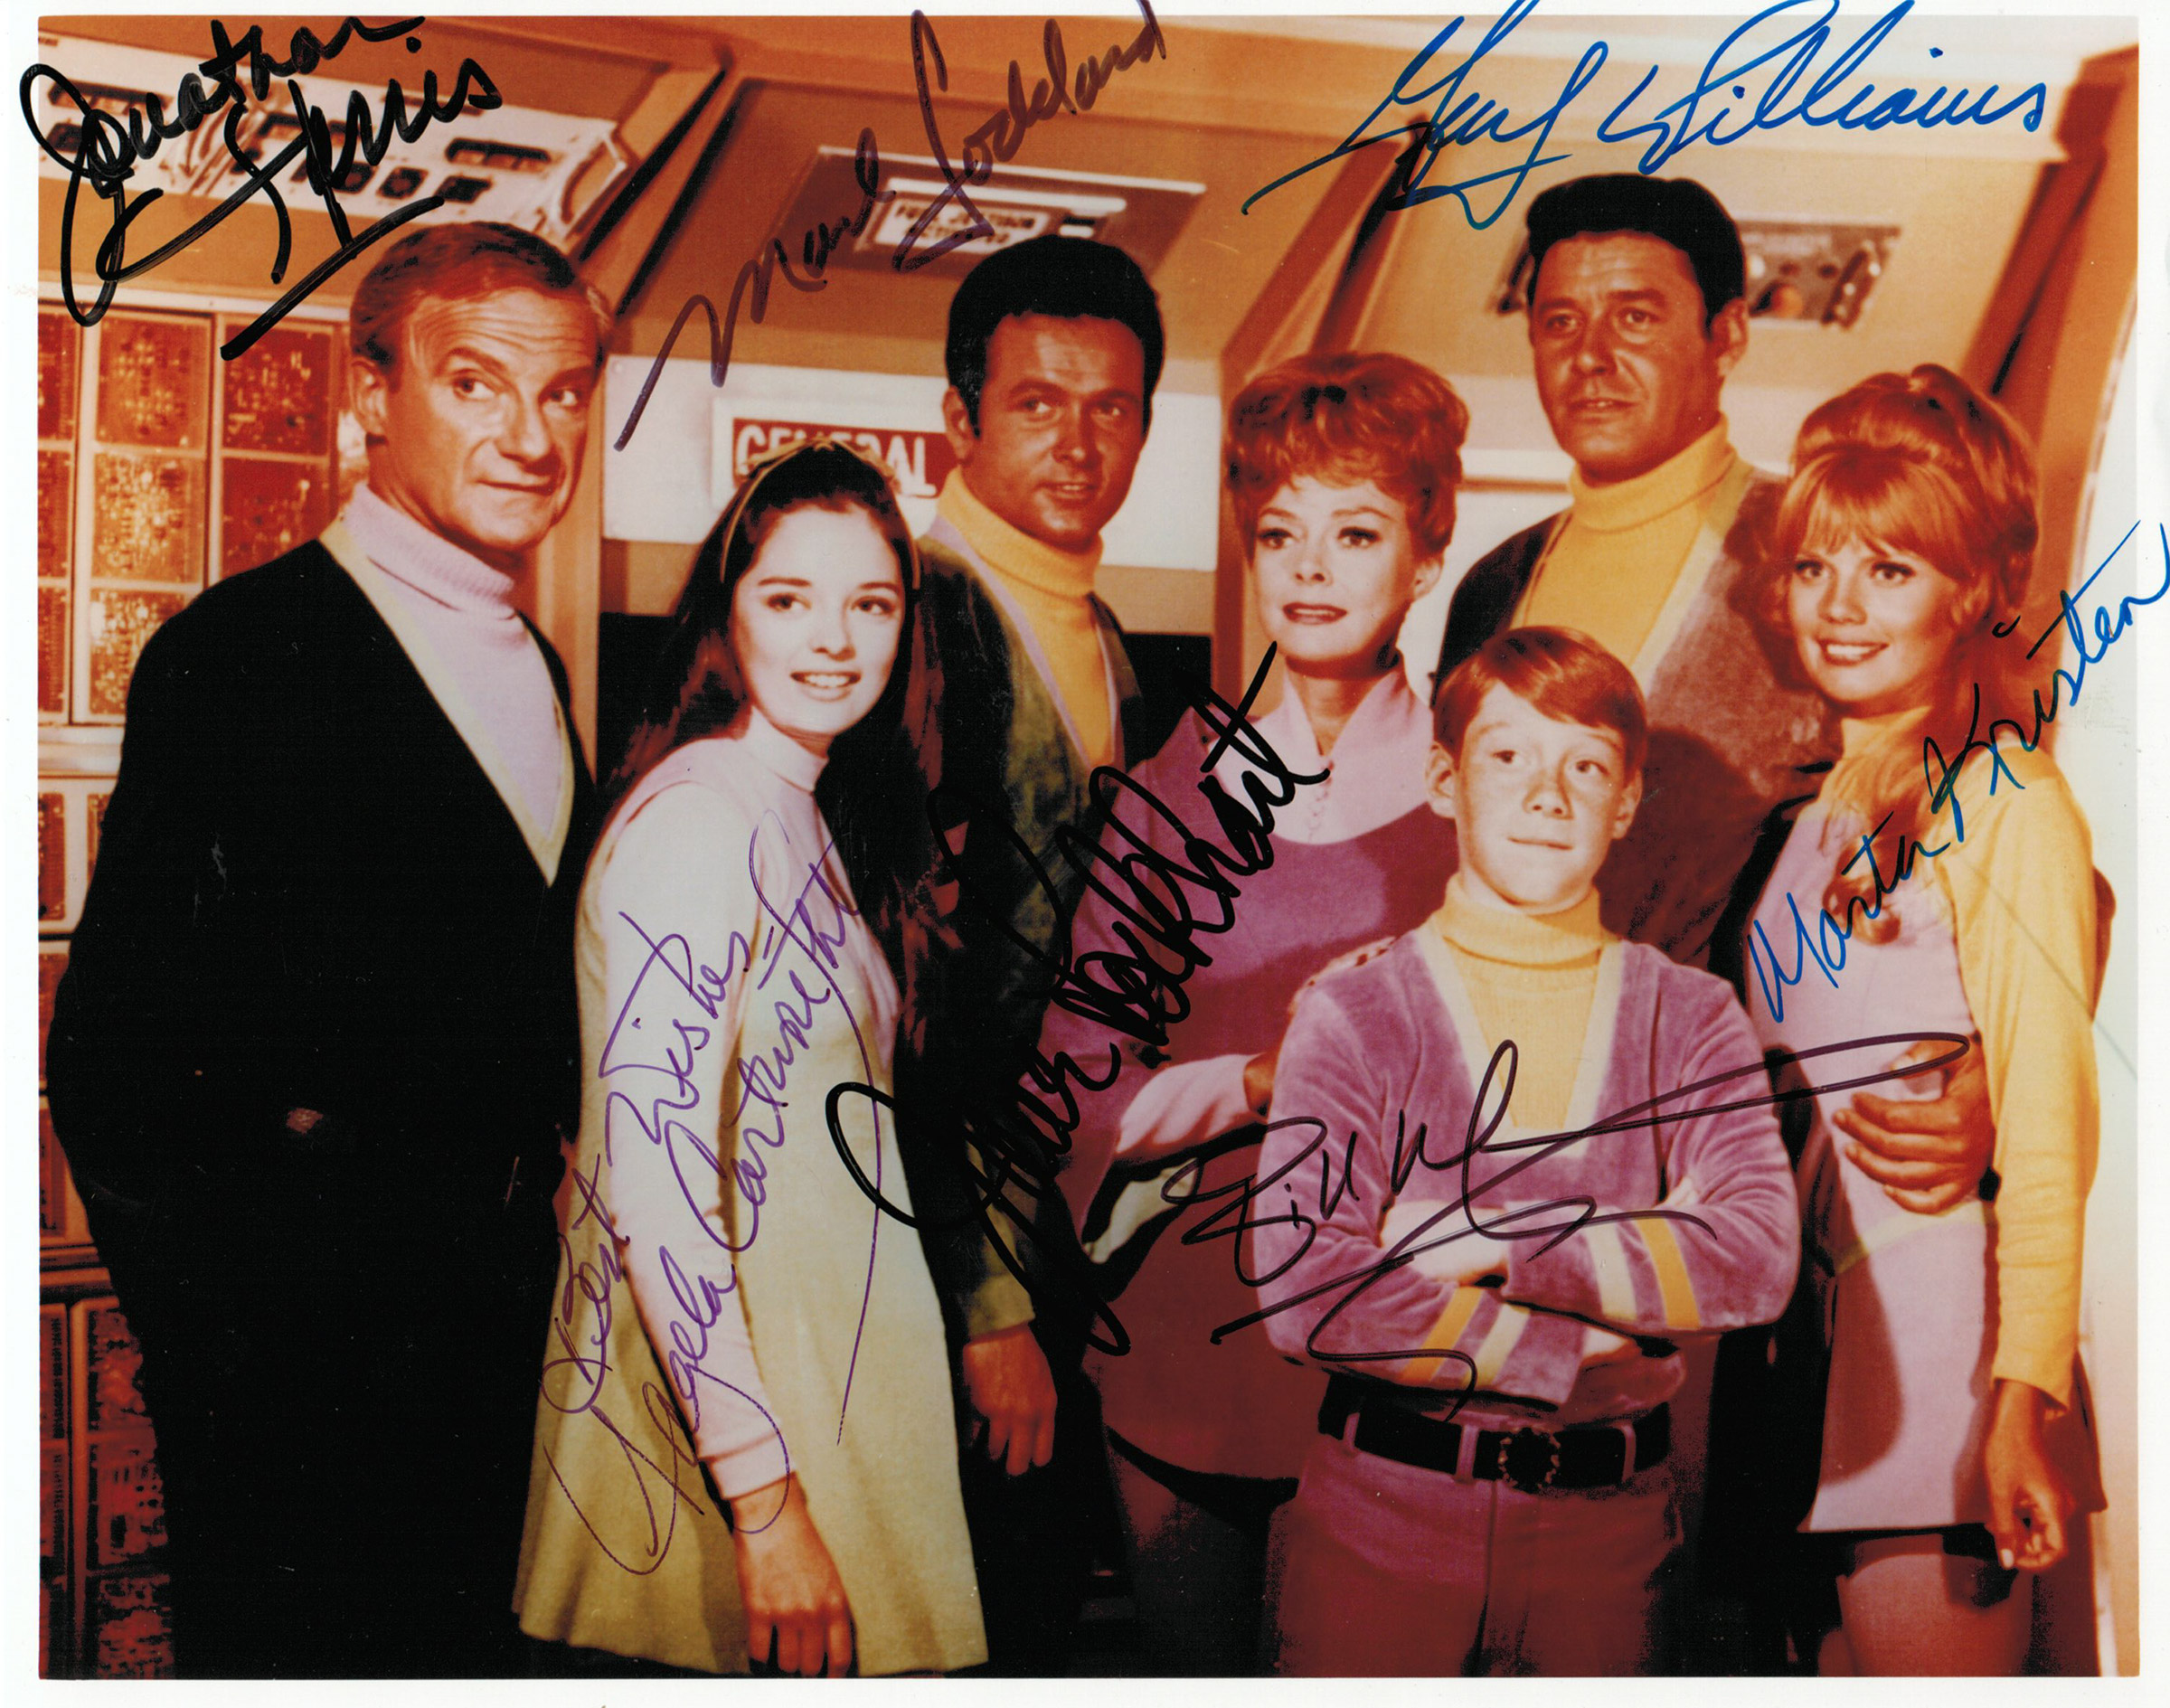 “Lost In Space” Cast Photo Signed by All Members